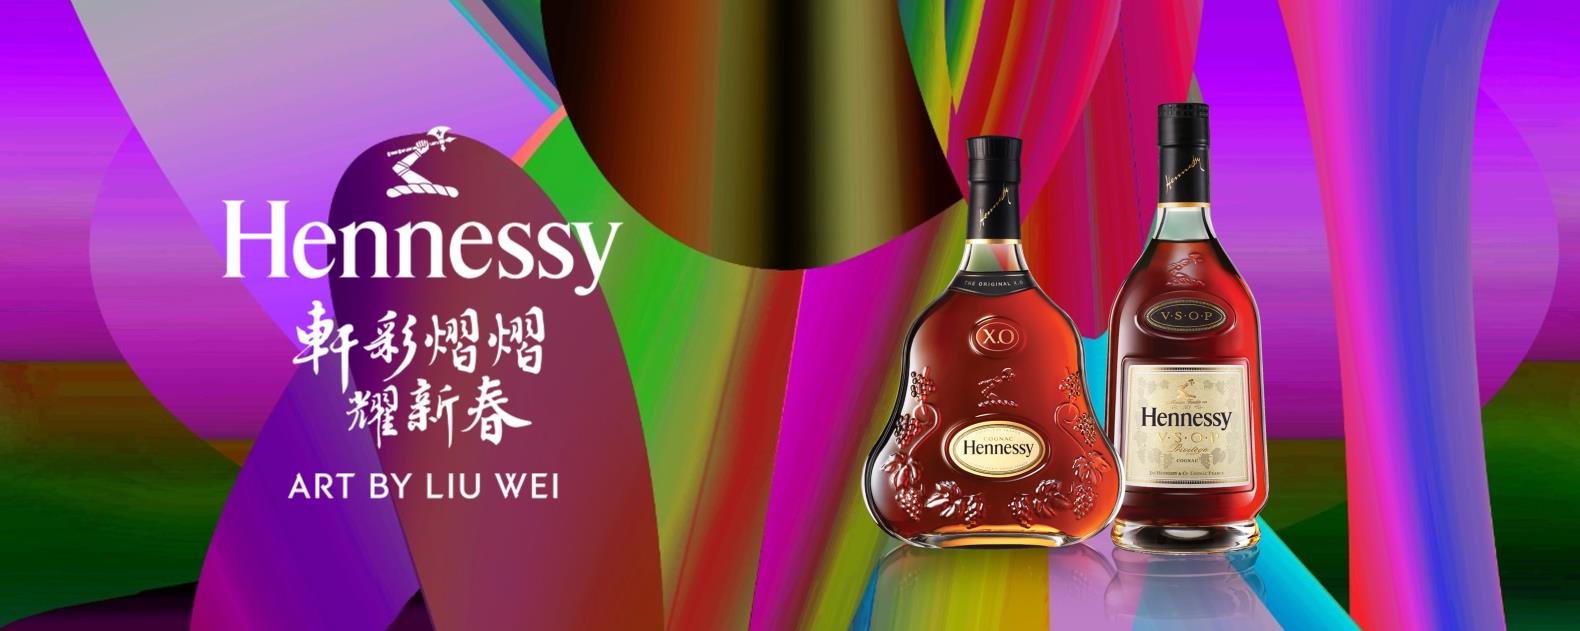 Hennessy 2021 CNY Limited Edition